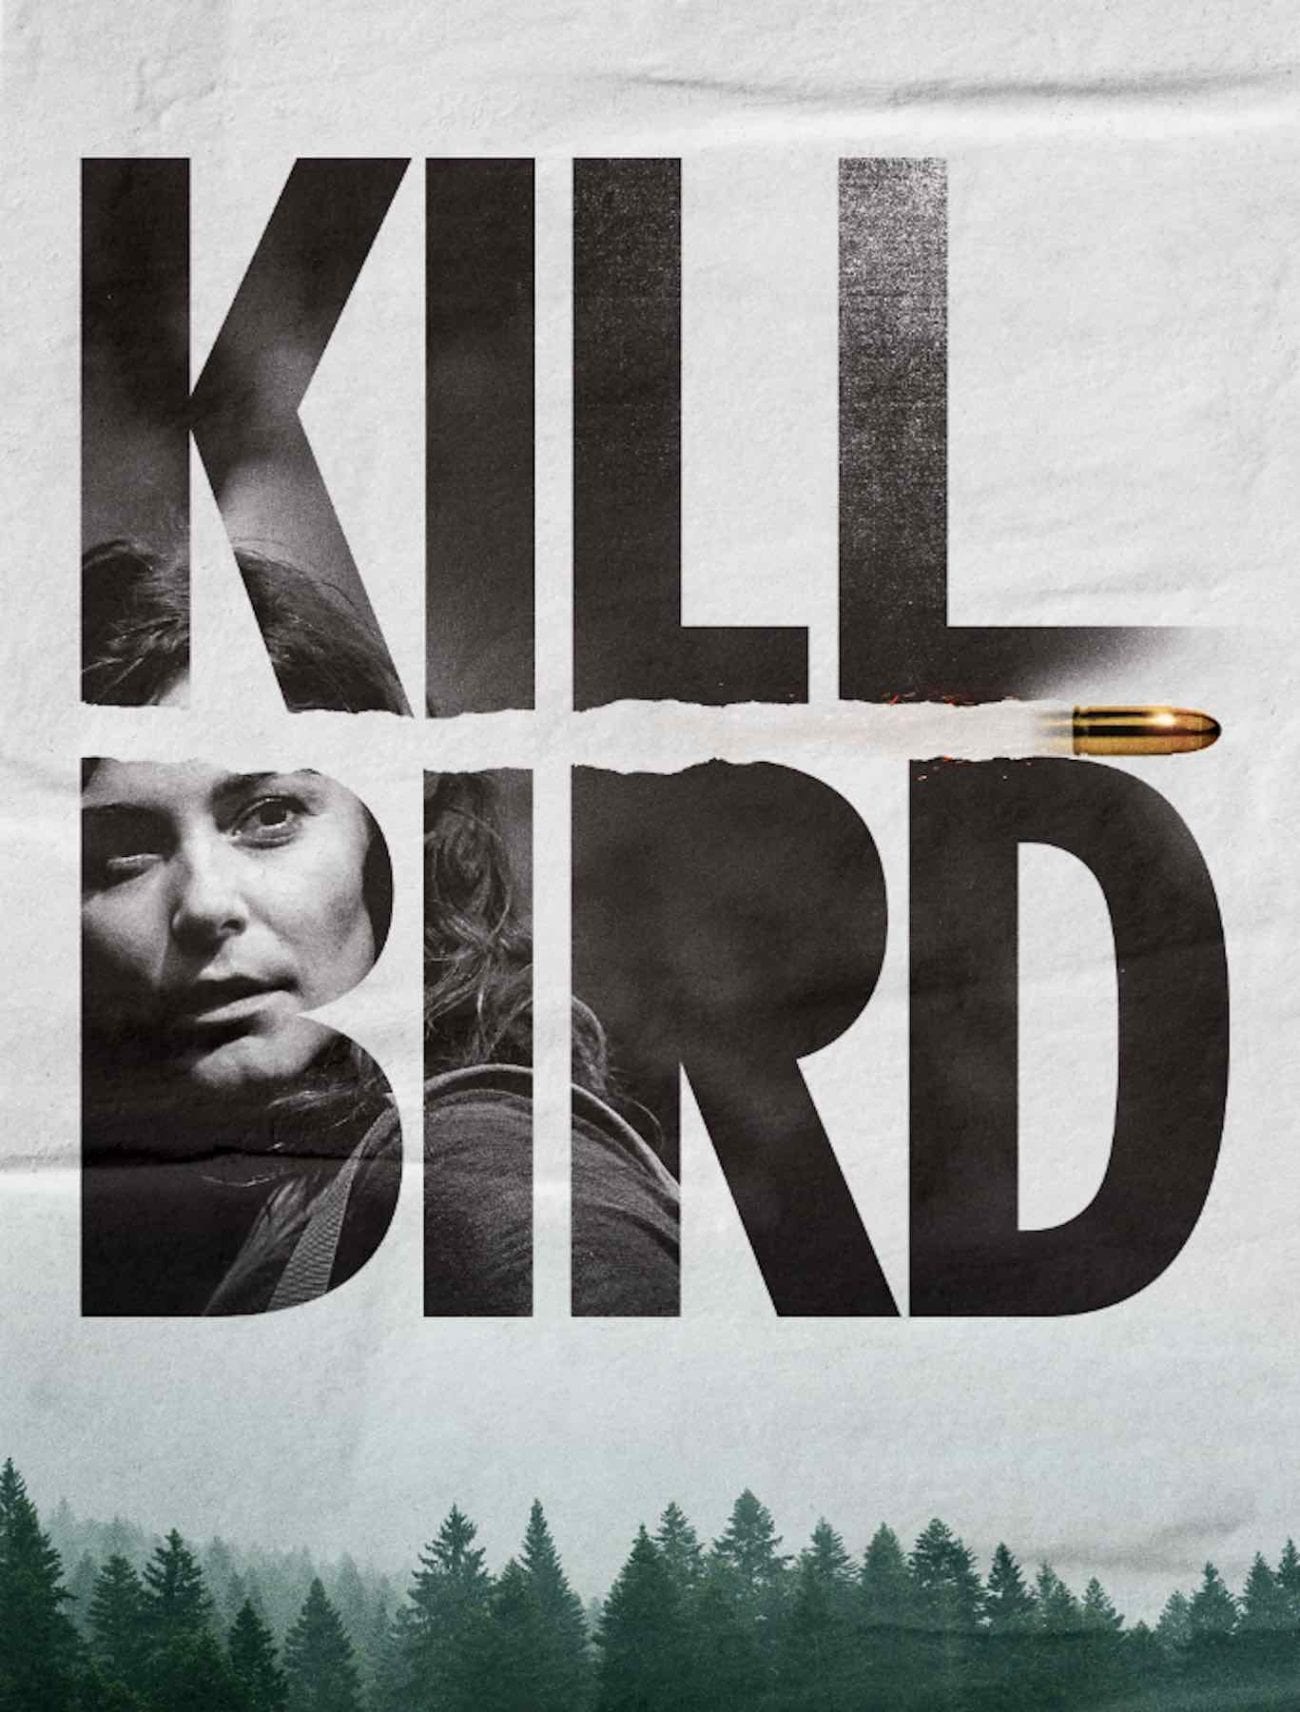 Our new indie movie obsession is Joe Zanetti’s high-intensity thriller debut feature Killbird, which premiered at 2019 Dances with Films this June.